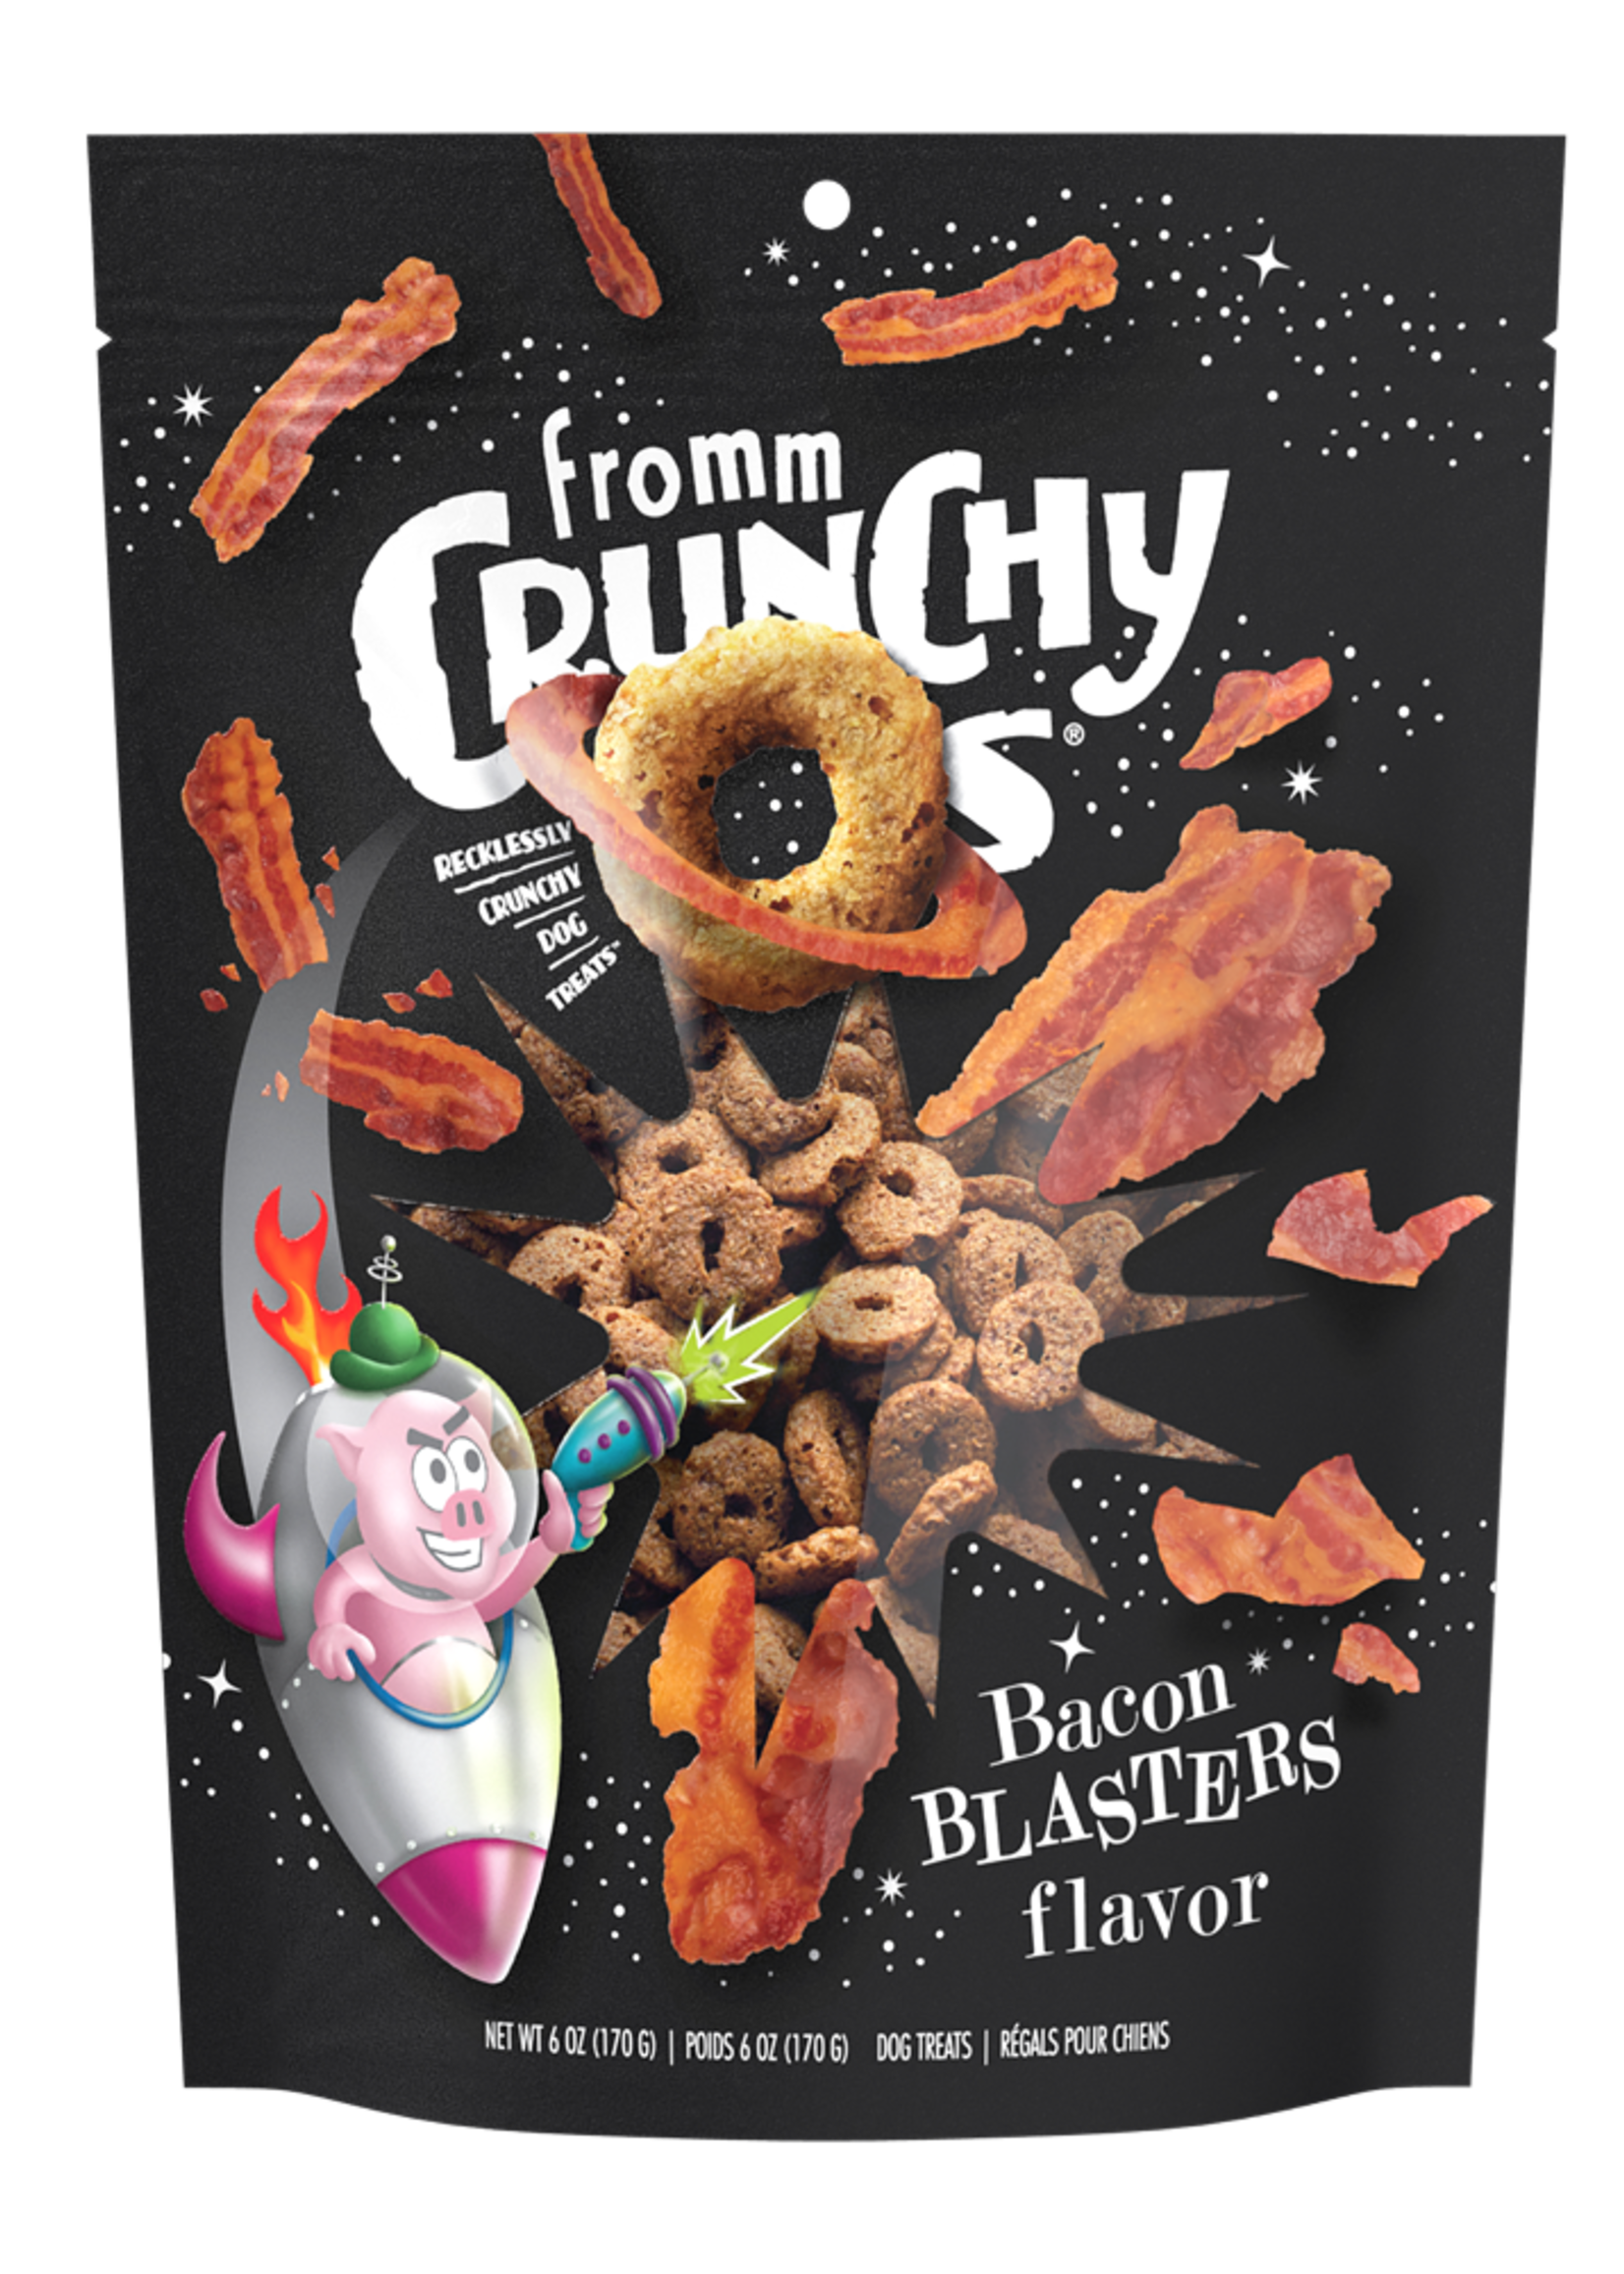 Fromm Family Foods Fromm, D, Crunchy O's, Bacon Blasters, 26z